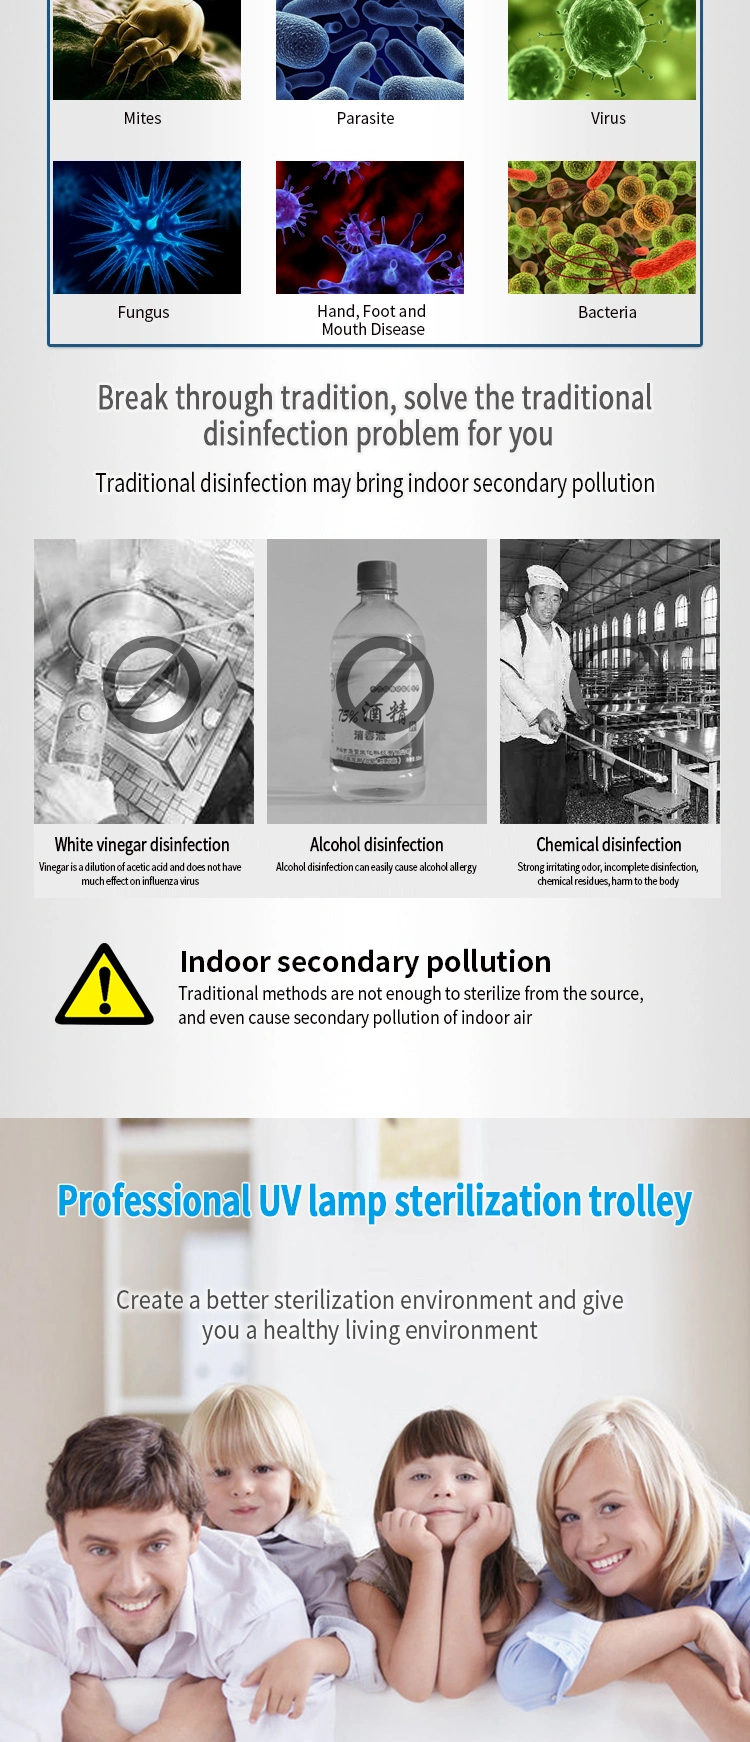 High Quality UV Light Sterilizer 150W Wheel Moveable Air Sterilizer Suitable for Medical